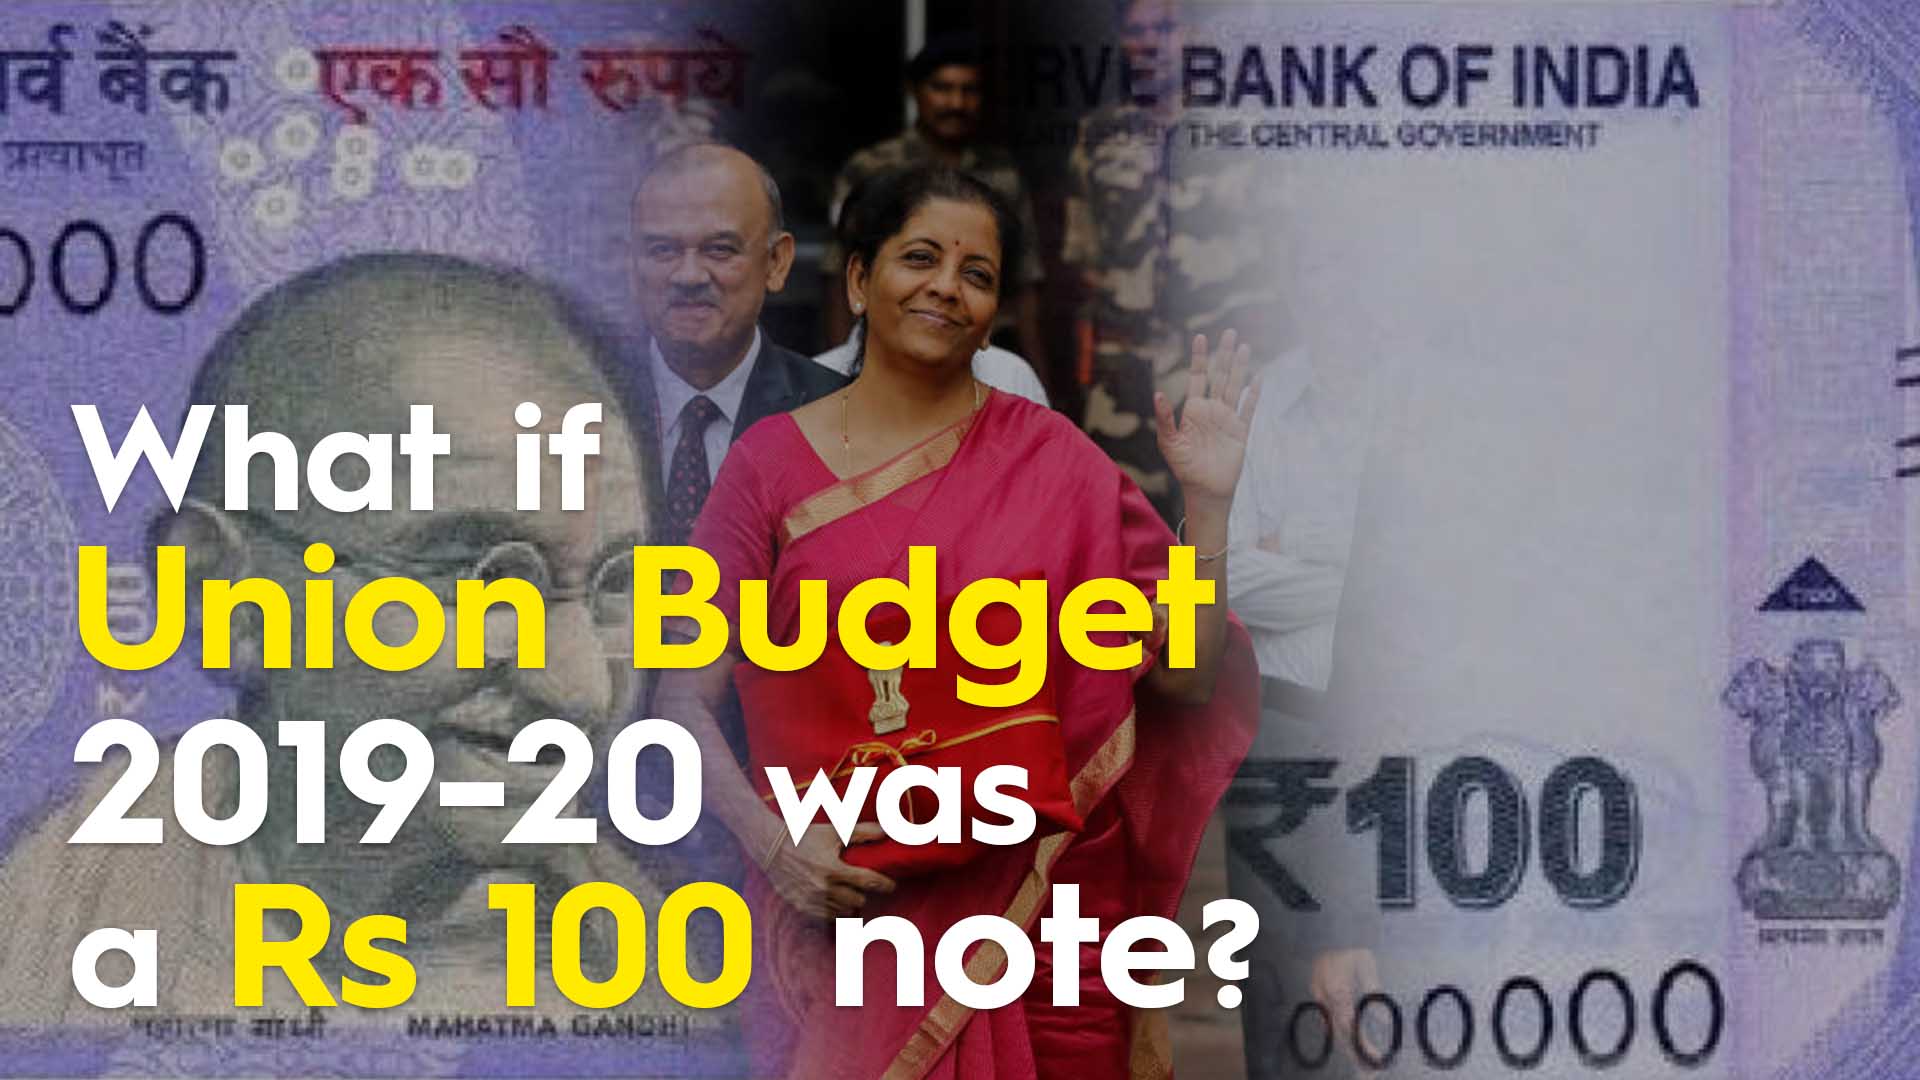 Budget 2019-20, Finance Minister, India, english news website, The Federal